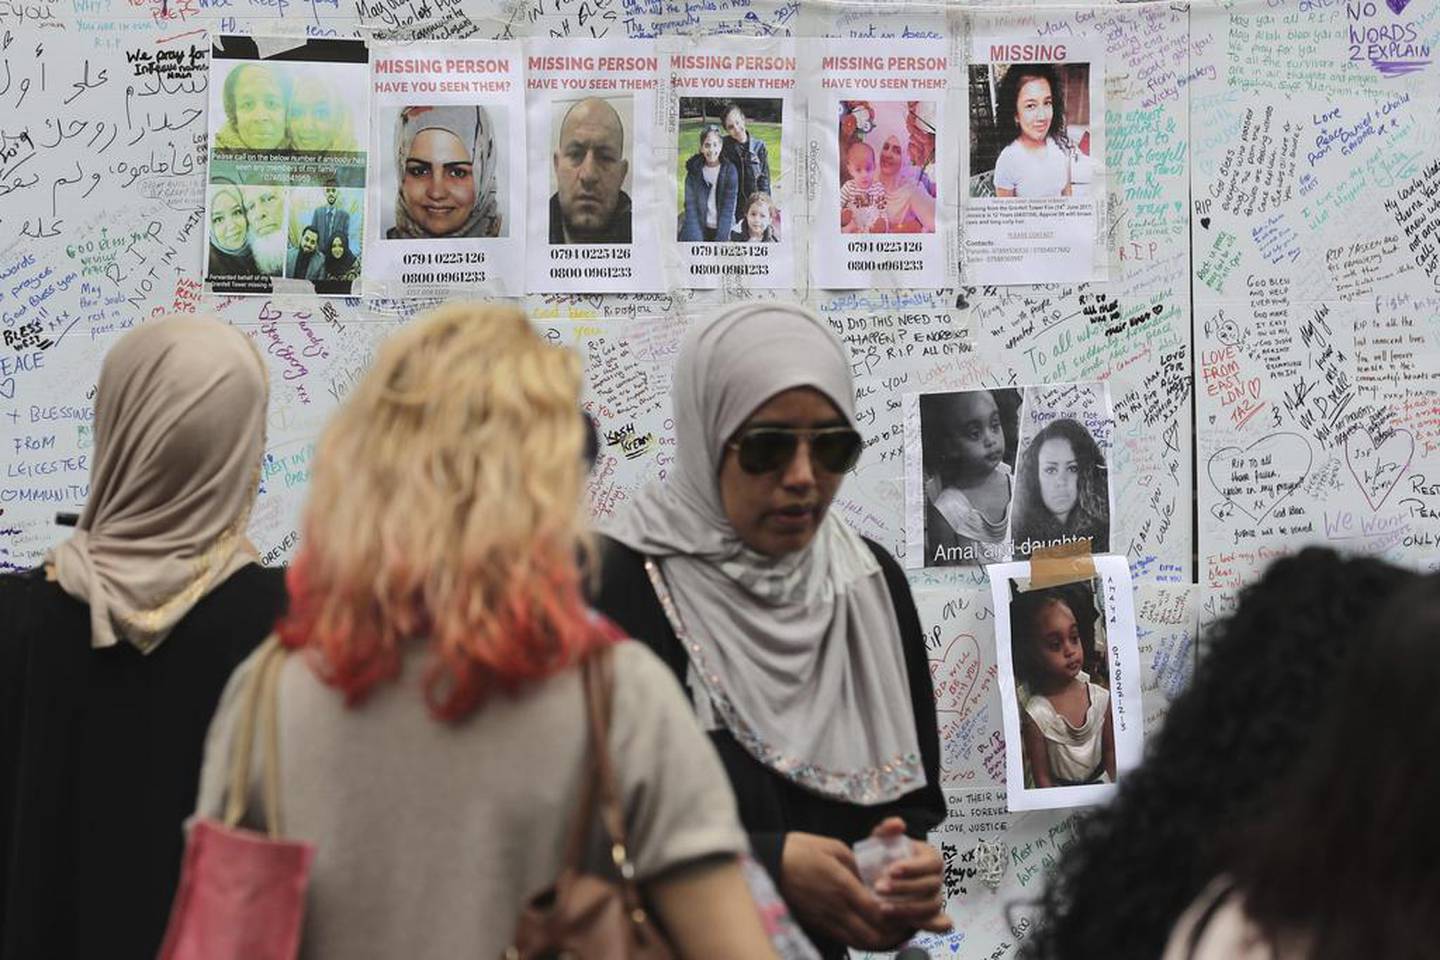 People view messages and missing persons posters at a community centre near Grenfell Tower after the June 2017 fire. AP 